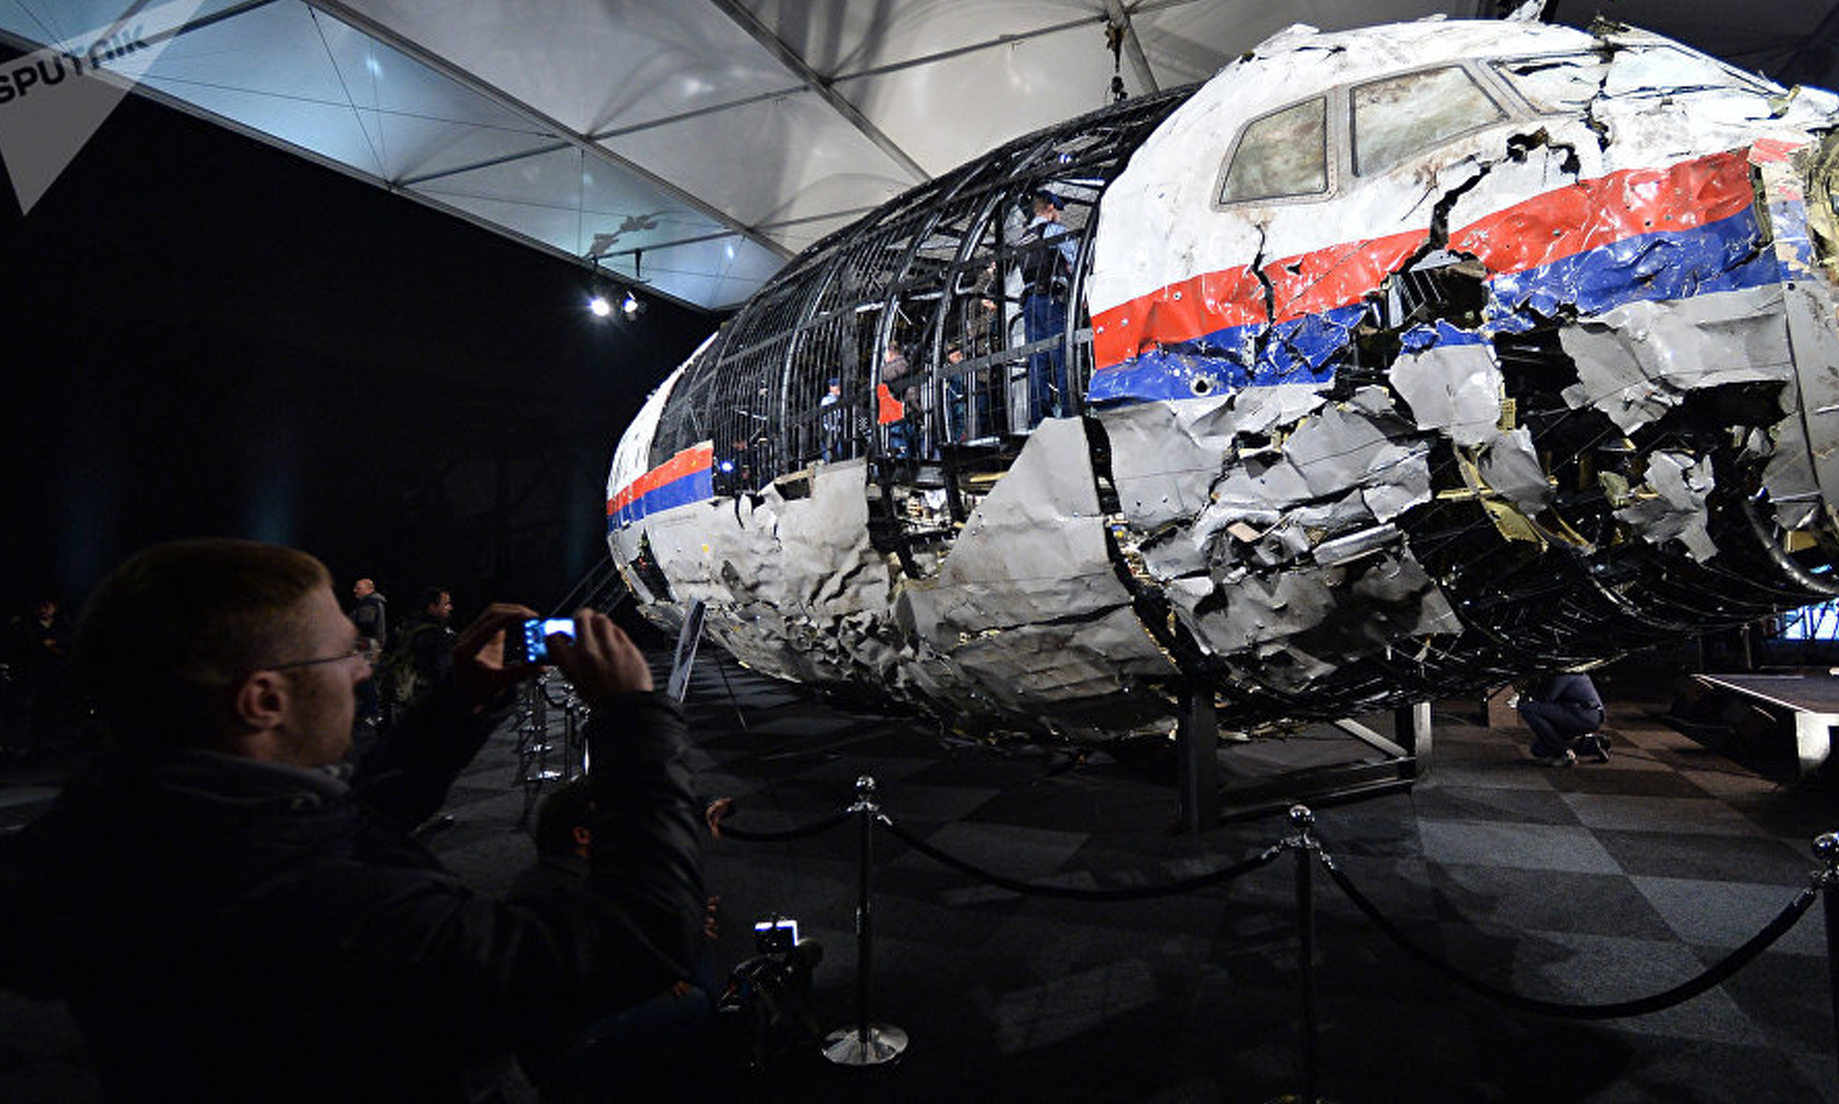 Dutch to put four people on trial for murder over Malaysia Airlines flight MH17 crash